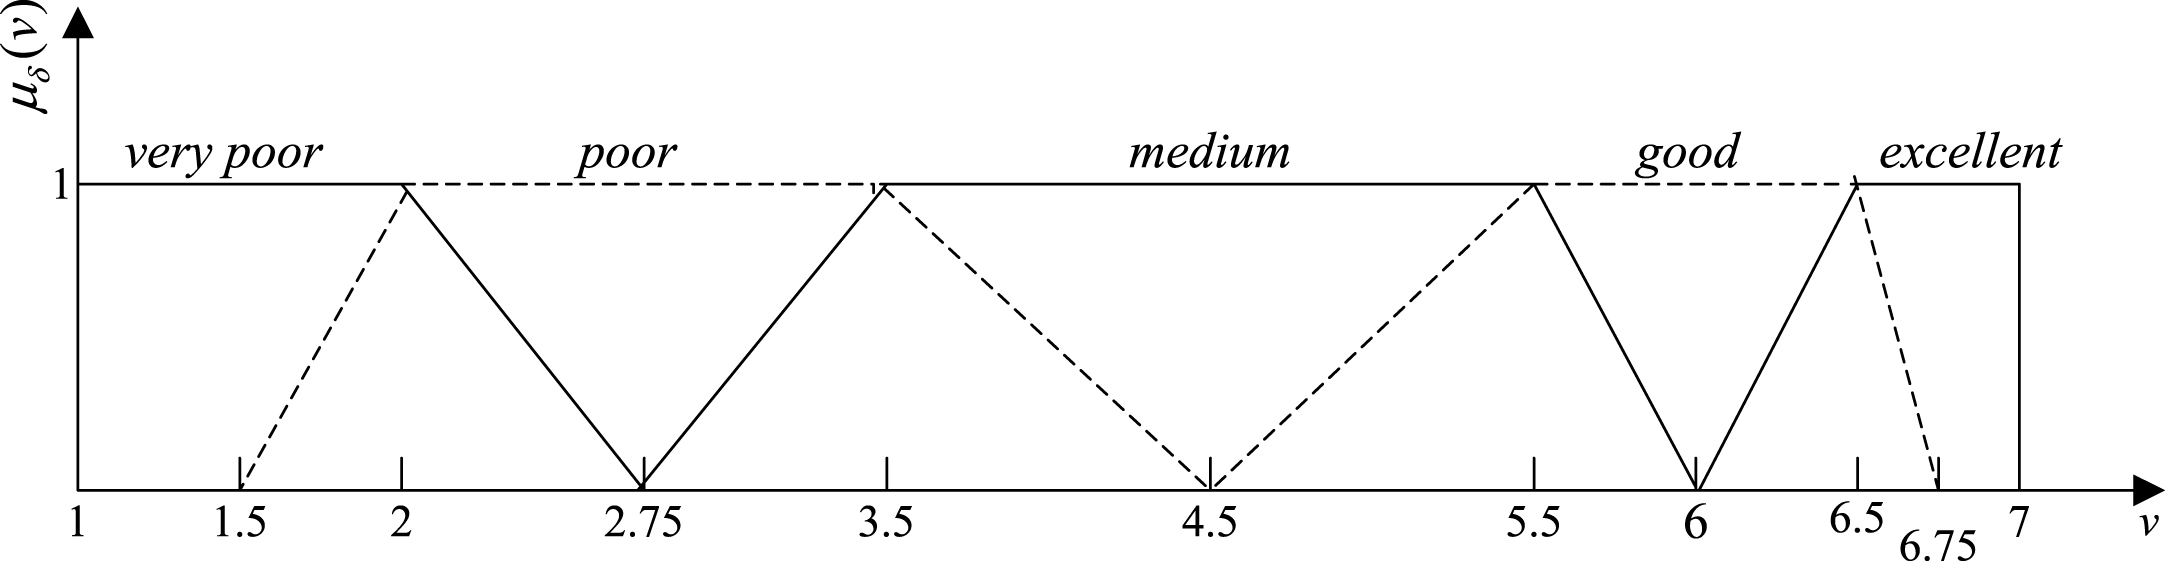 The fuzzy membership function of satisfaction. v is measure value, μδ(v), which ranges from 0 to 1, and means the value’s corresponding membership degree to very poor, poor, medium, good, and excellent, respectively. 1, 2, 3.5, 5.5, 6.5, and 7 are the value of v1, v2, v3, v4, and v5 respectively. 1.5, 2.75, 4.5, 6, and 6.75 are the value of c1, c2, c3, c4, and c5.